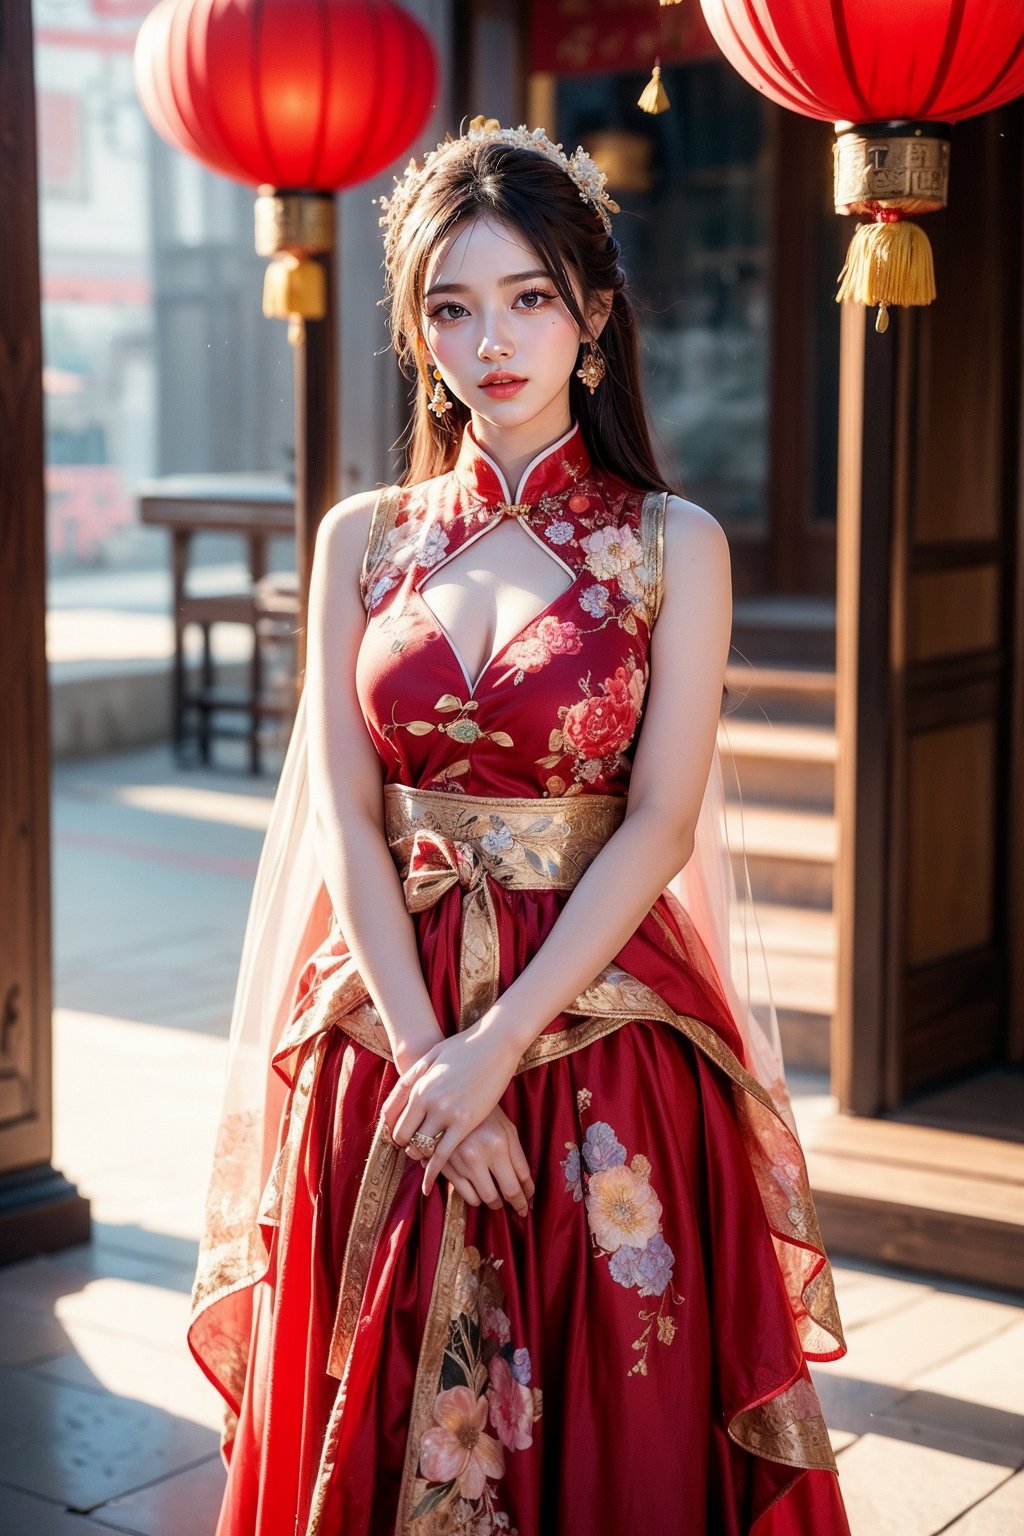 Standing, sideways, turning to look at the viewer, a girl wears traditional Han Chinese wedding attire, consisting of a beautifully embroidered bright red gown with a stand-up collar and a long skirt, with delicate floral embellishments and a decorated headdress with hanging strands of jewelry. and floral accessories, (((radiate a bright smile and joy))), Chinese architecture, red, golden yellow, red lanterns, Photography, Masterpiece, Best Quality, 8K, HDR, Nikon AF-S 105mm f/1.4E ED ,